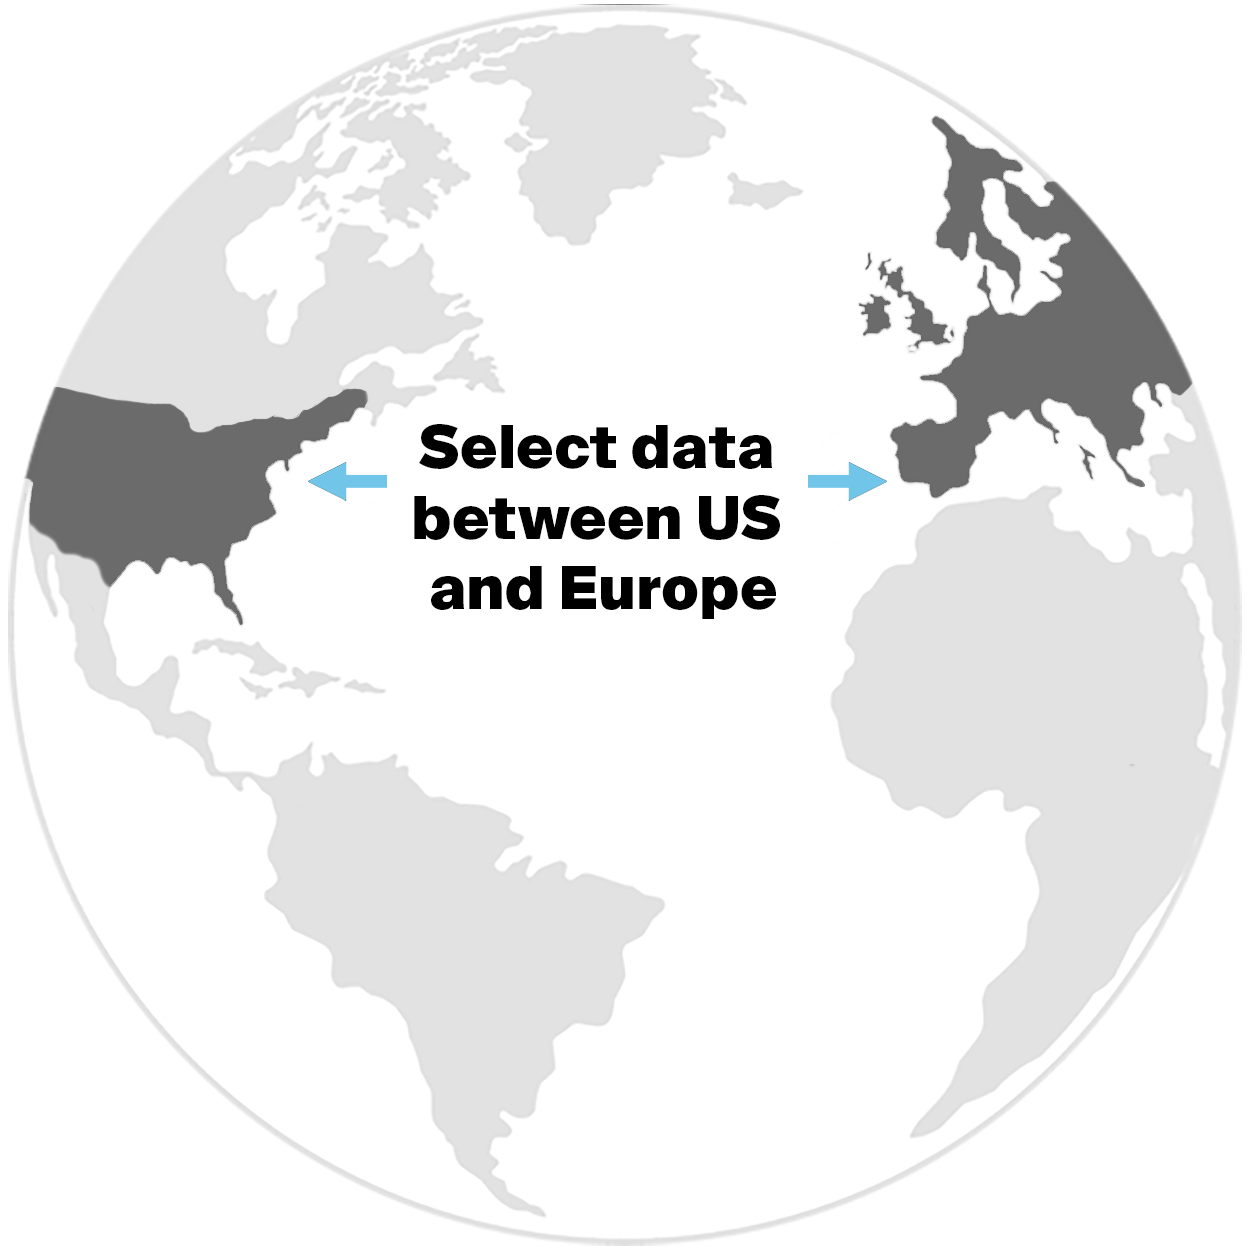 Select data between US and Europe